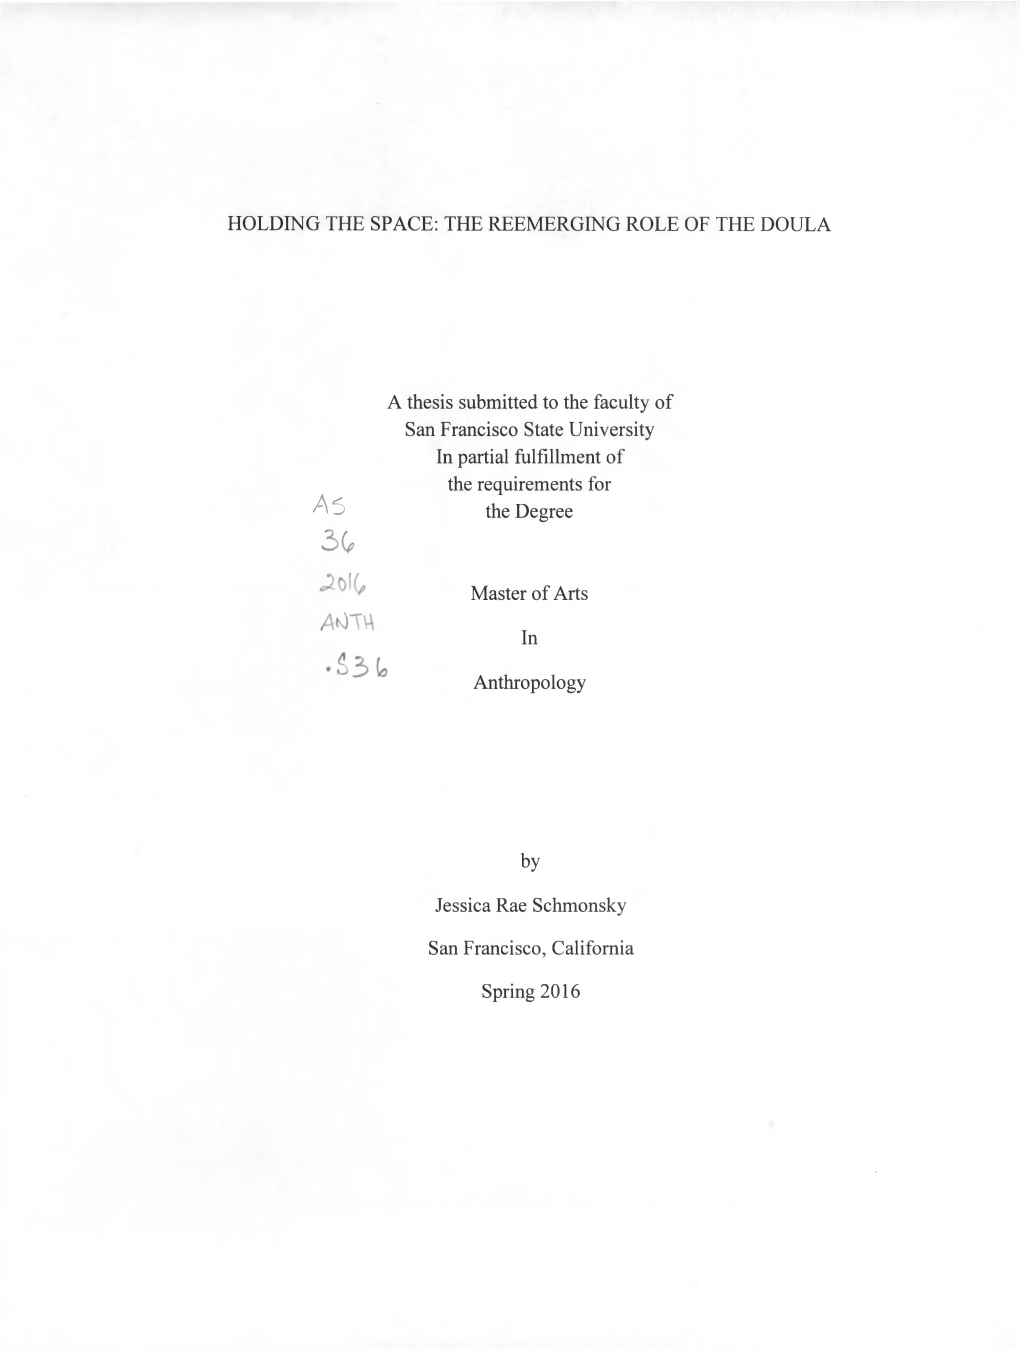 HOLDING the SPACE: the REEMERGING ROLE of the DOULA a Thesis Submitted to the Faculty of San Francisco State University in Parti